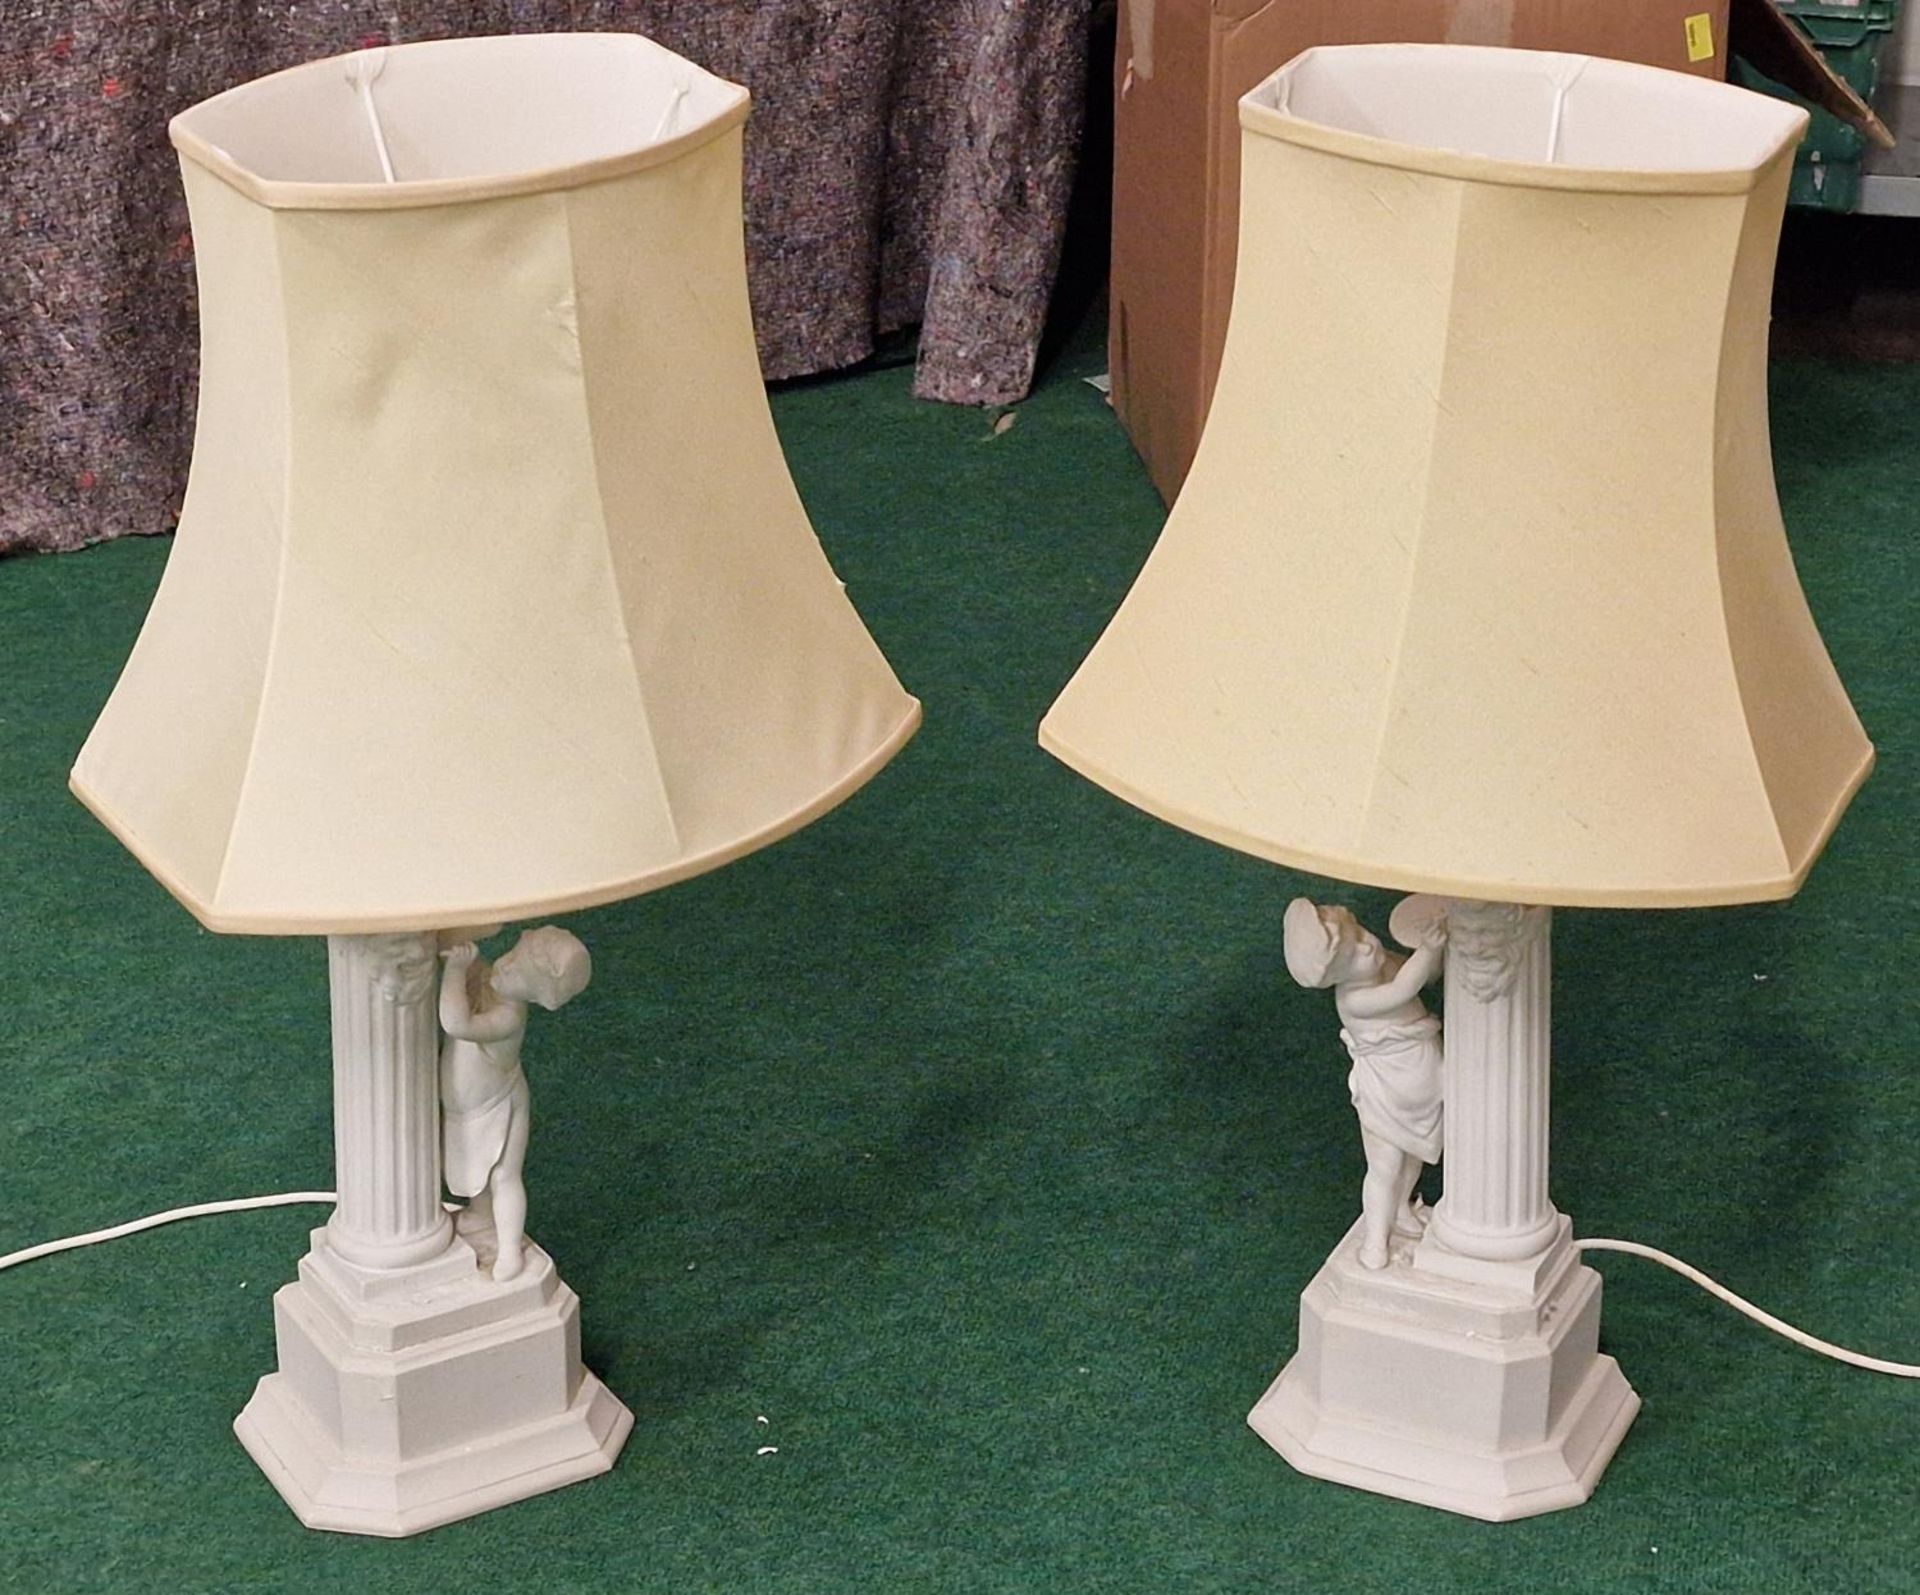 Pair of contemporary table lamps depicting children and Corinthian columns includes shades.